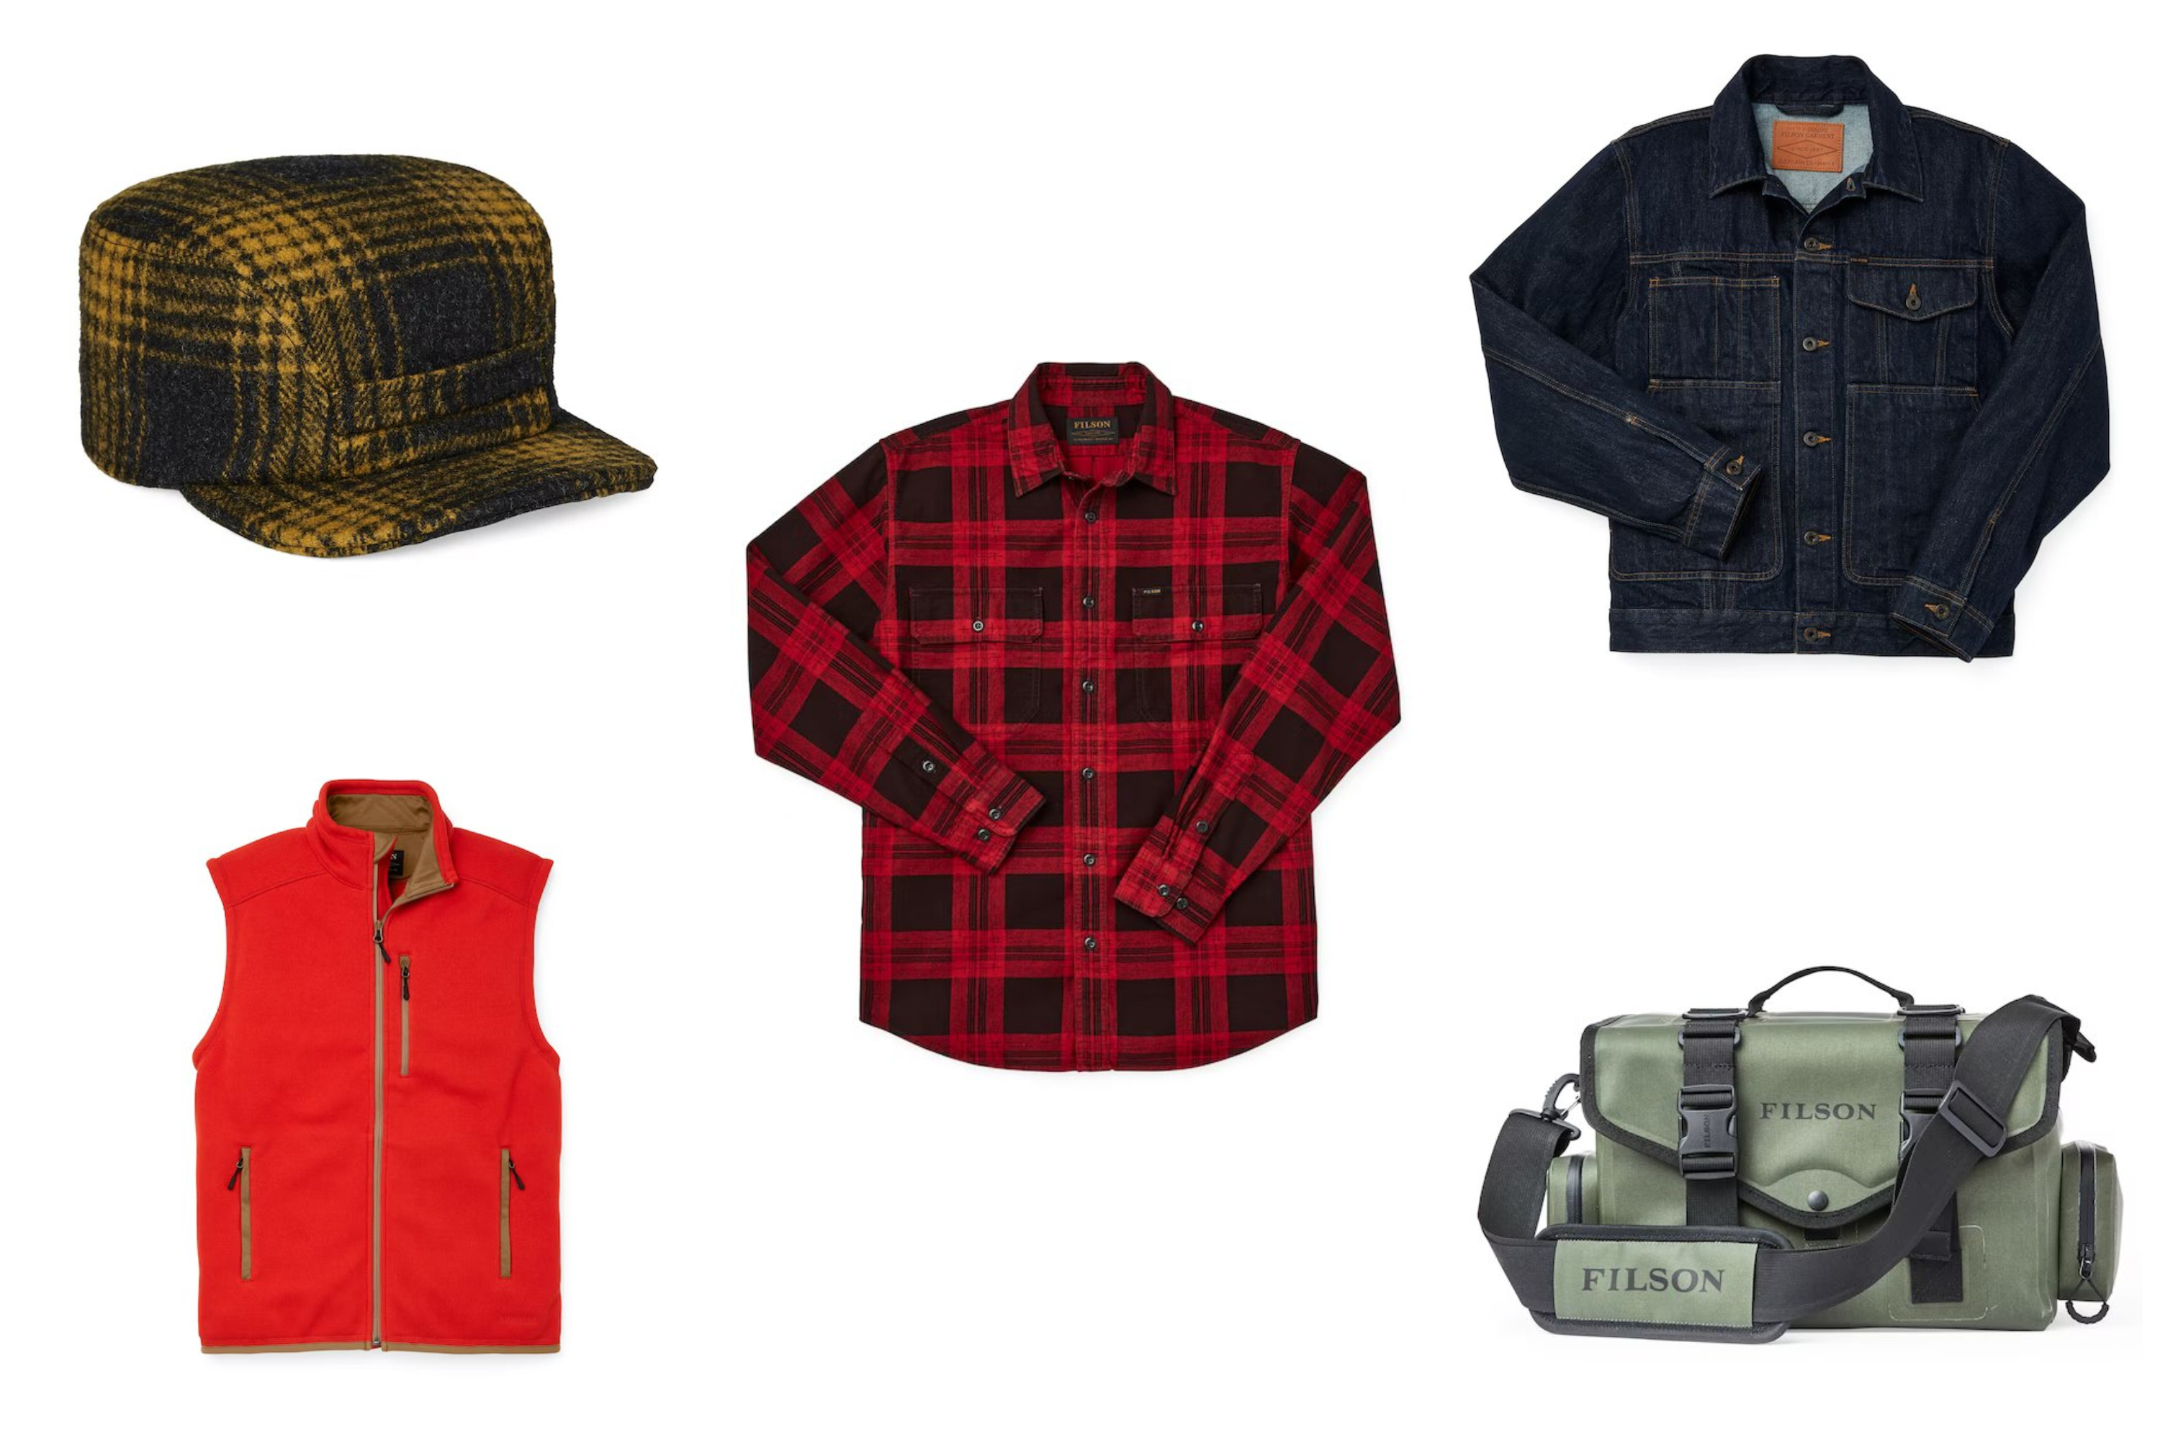 Filson Is Having A Warehouse Sale With 500+ Items Discounted Right Now ...